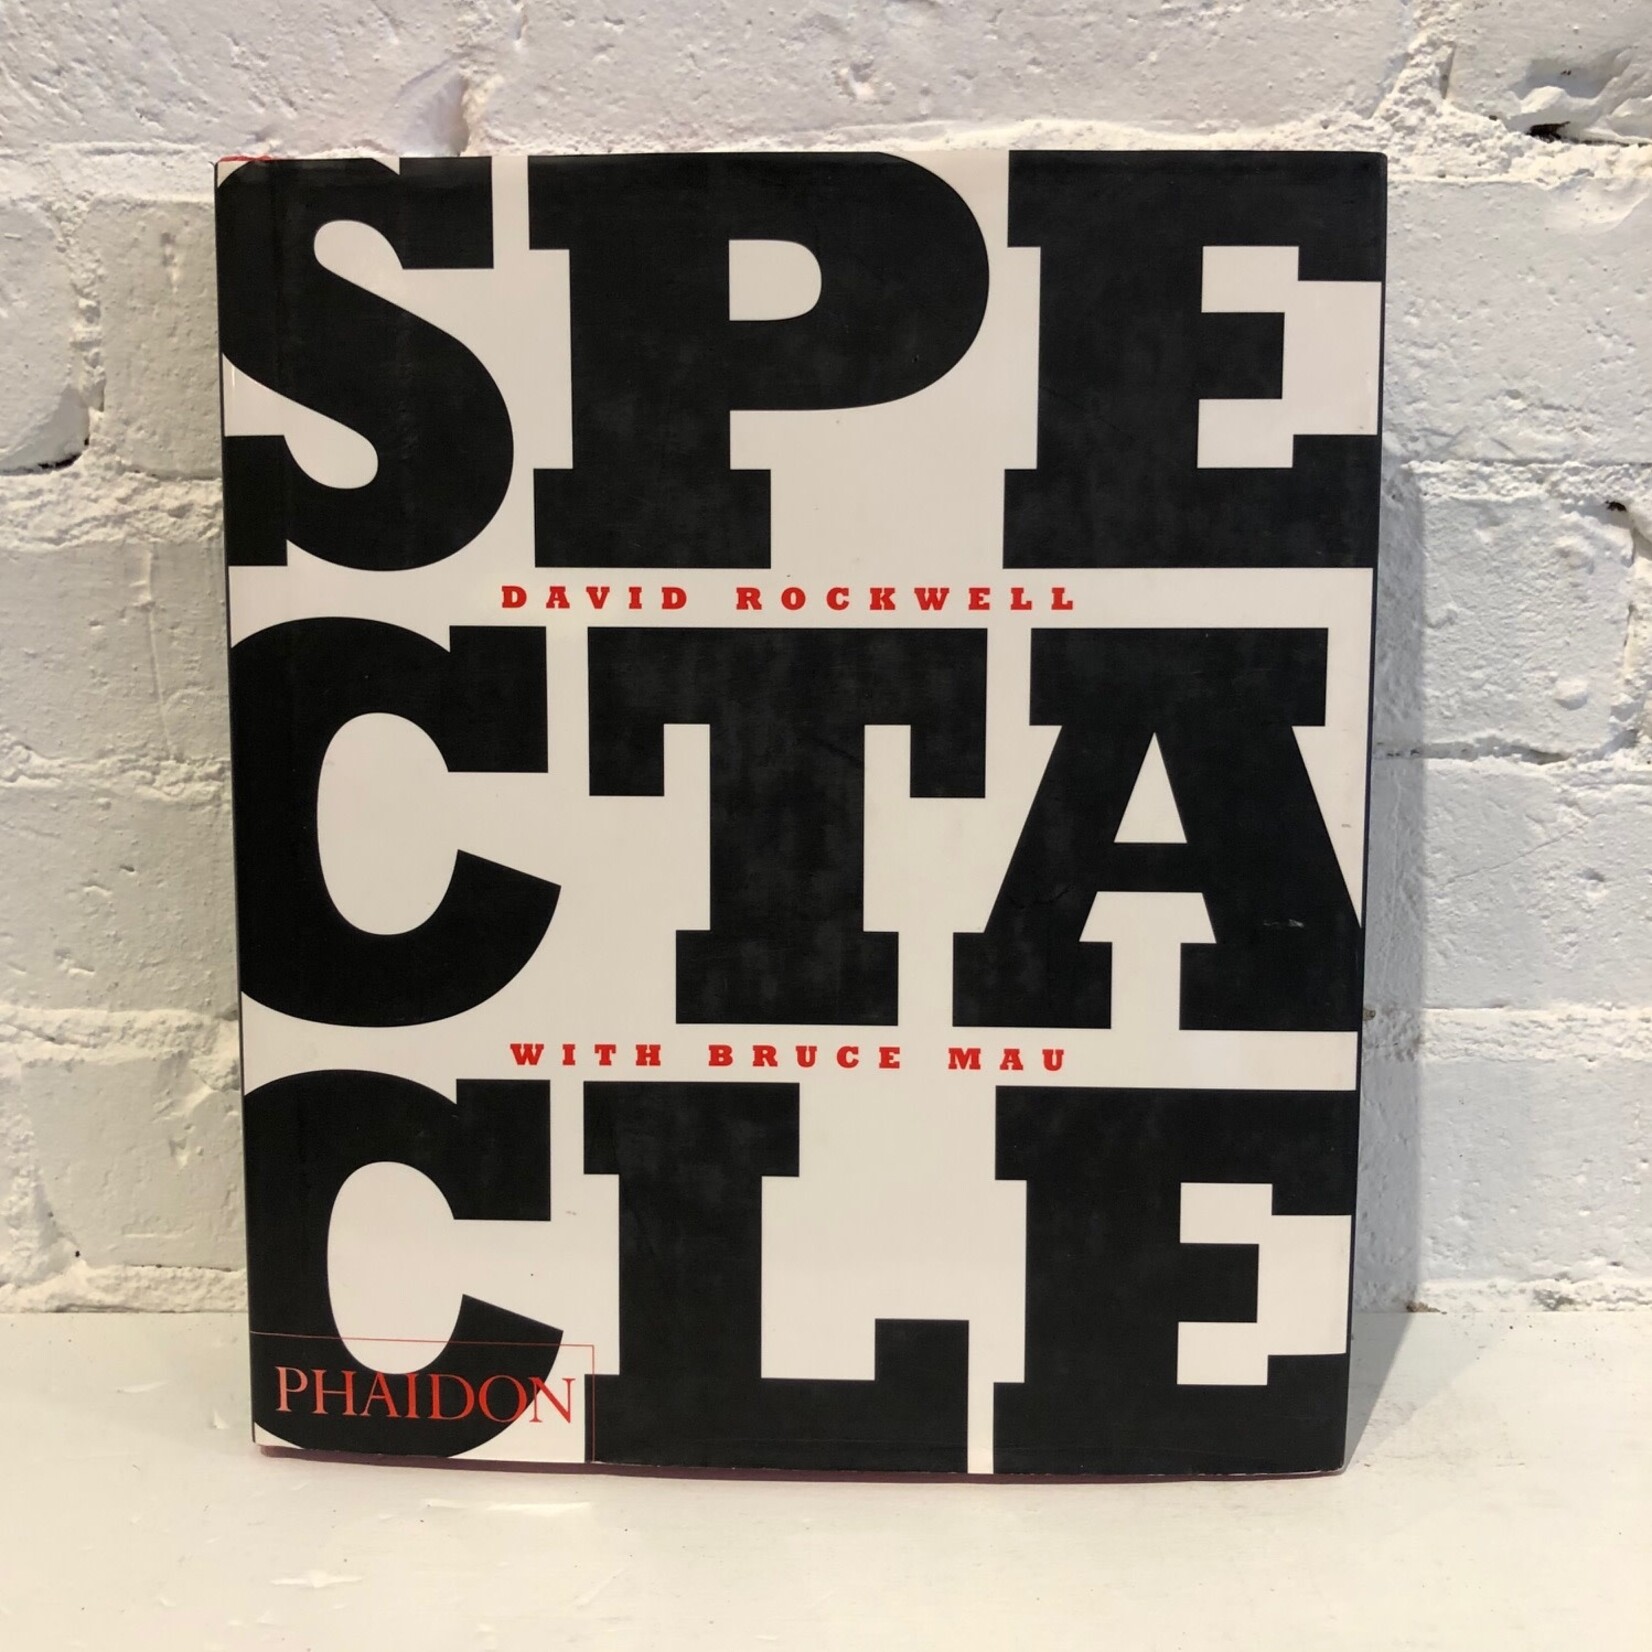 Spectacle by David Rockwell & Bruce Mau